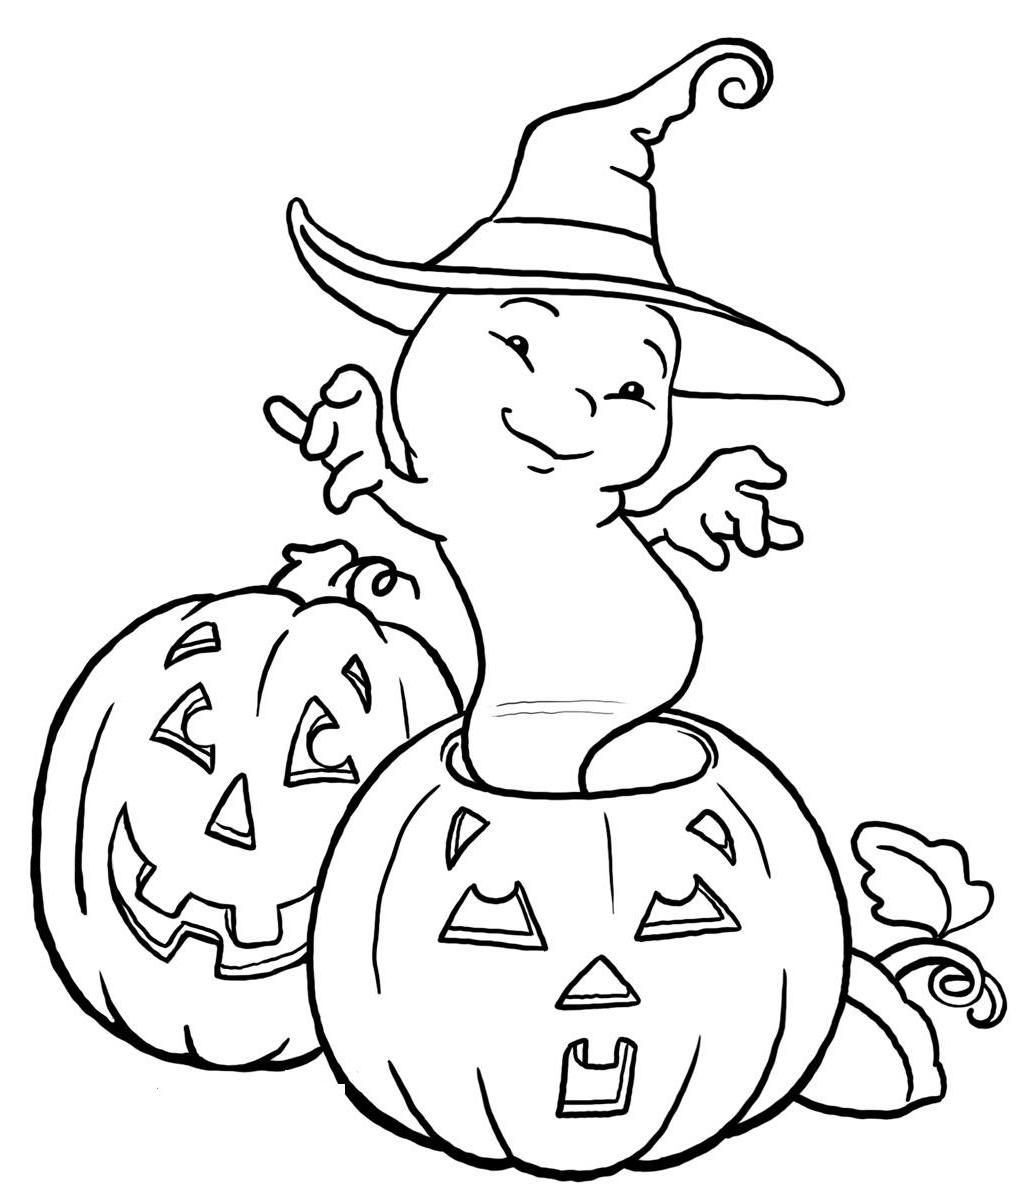 Halloween Pumpkin Coloring Pages Printables Halloween Ghost And Pumpkin Coloring Pages Kids Hallowen Coloring